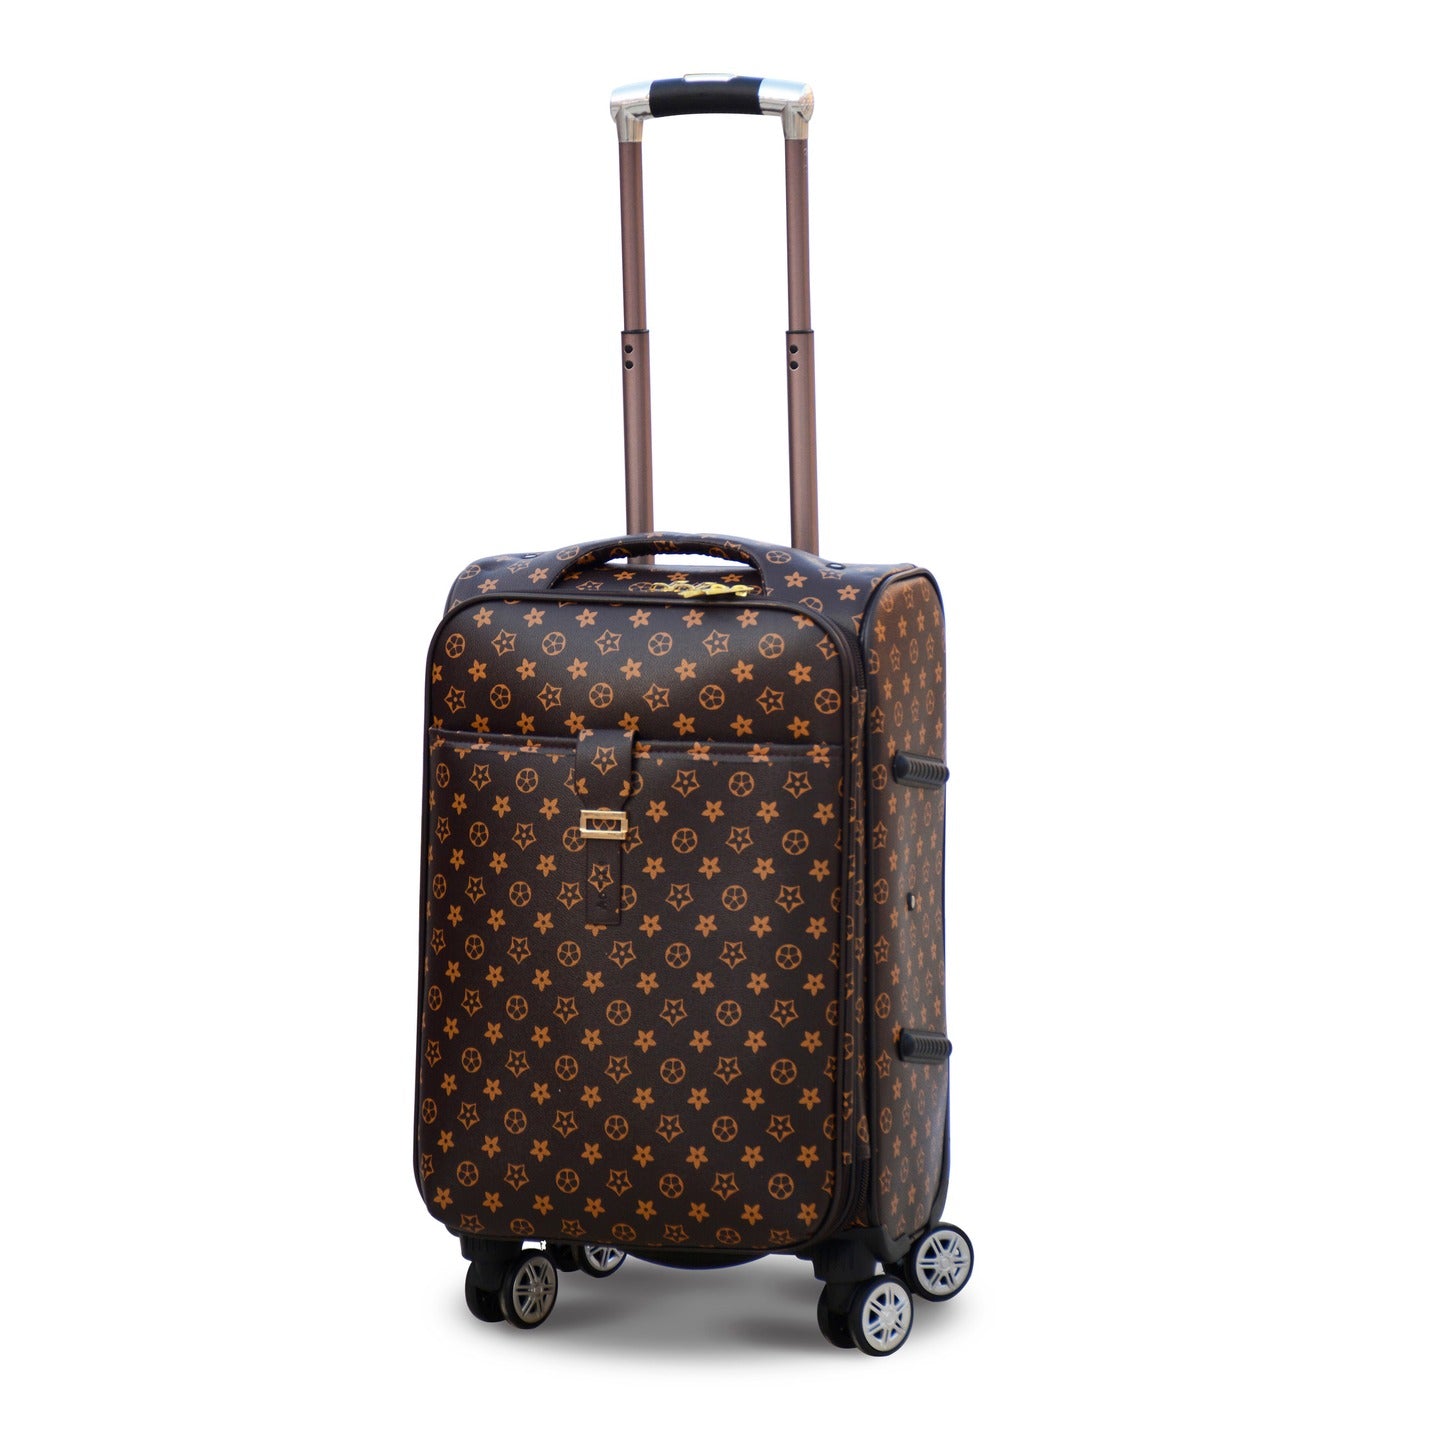 20" Brown Colour LVR PU Leather Luggage Lightweight Soft Material Carry On Trolley Bag with Spinner Wheel zaappy.com